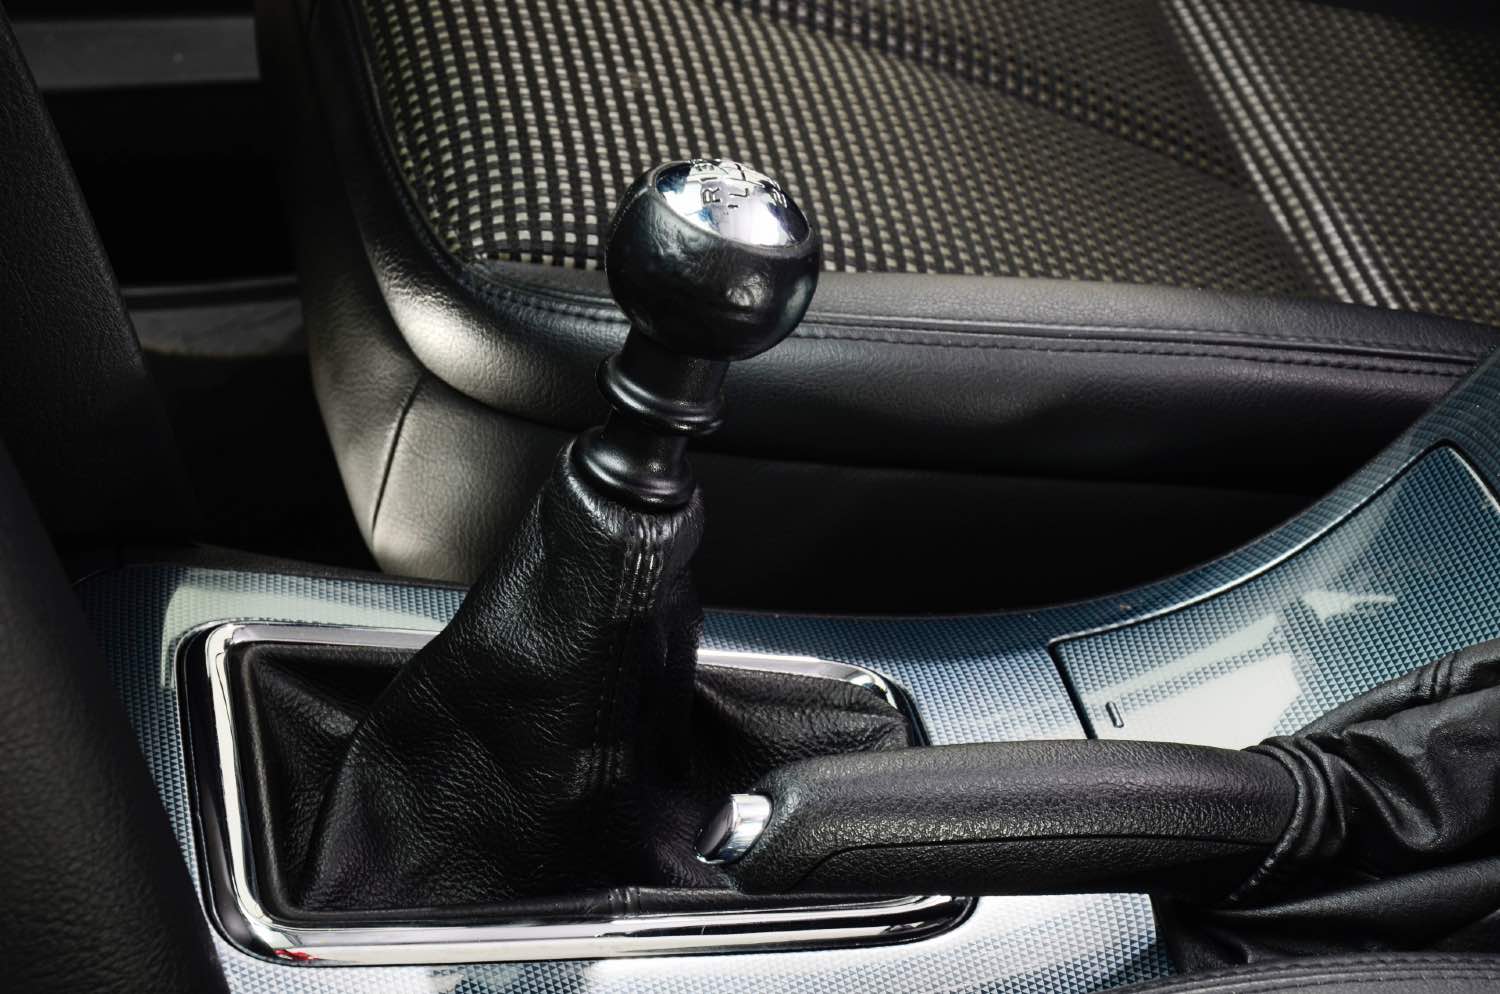 A gear shift and emergency brake